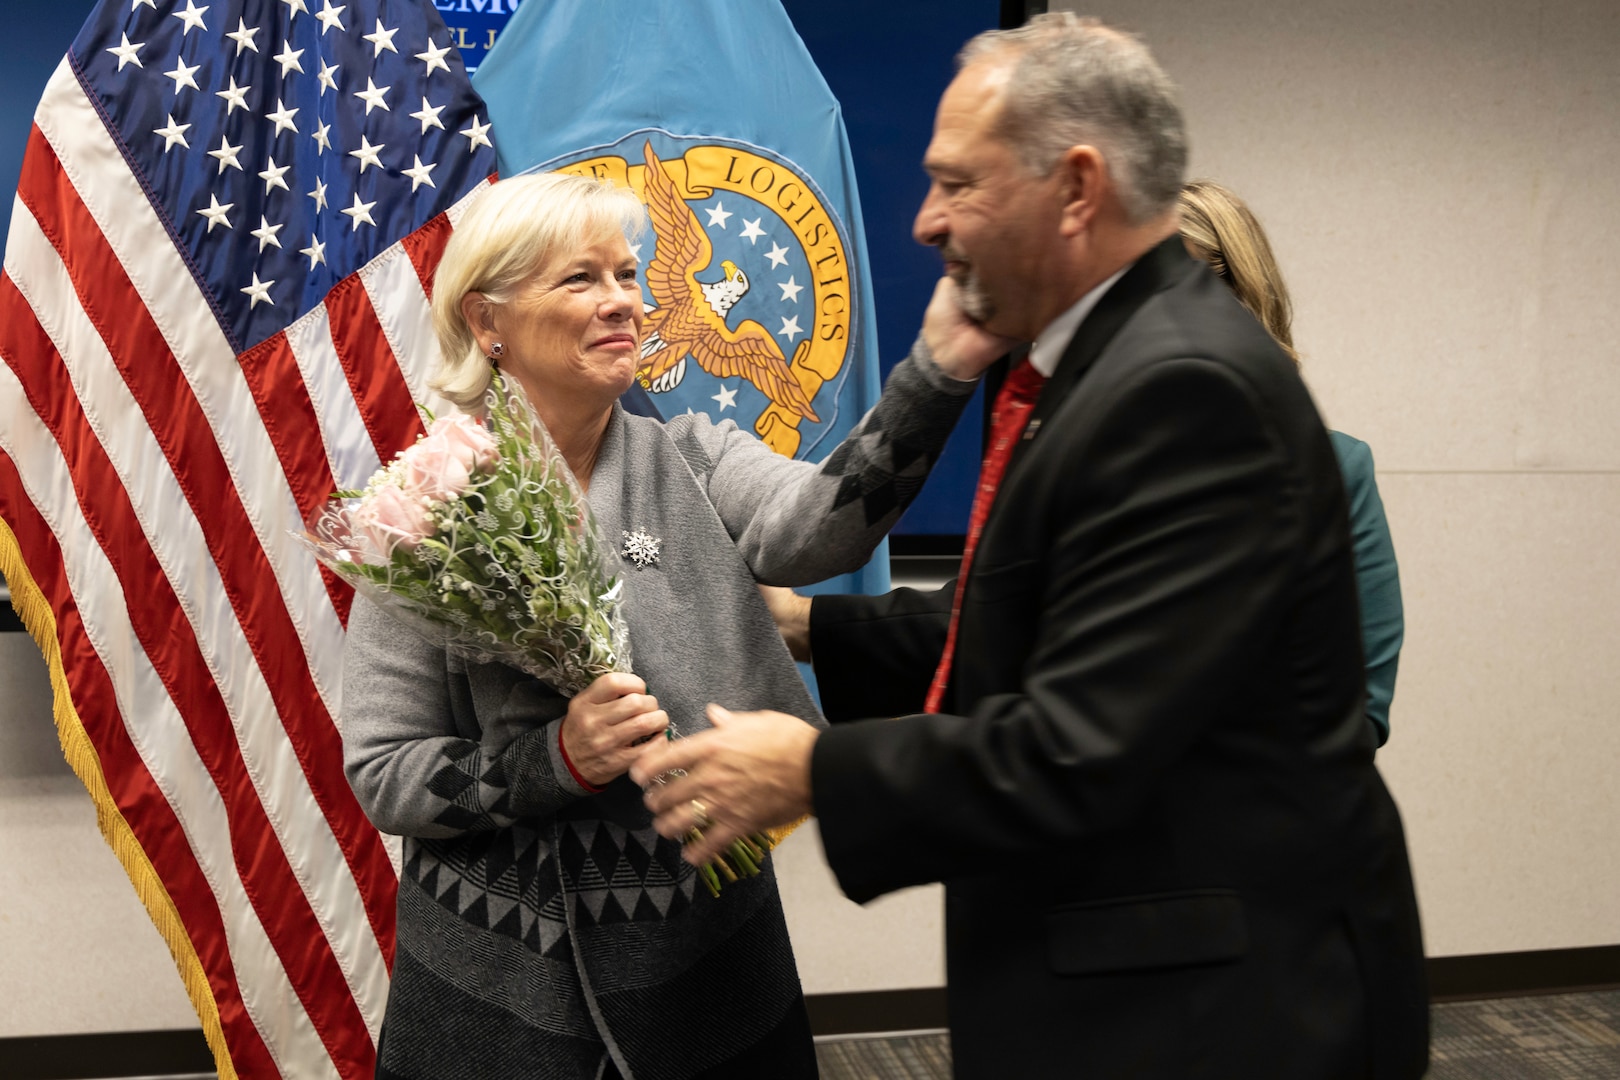 A light skinned man with graying hair in a dark suit with red tie hands pink flowers to a light skinned woman in a gray sweater in a conference type room.